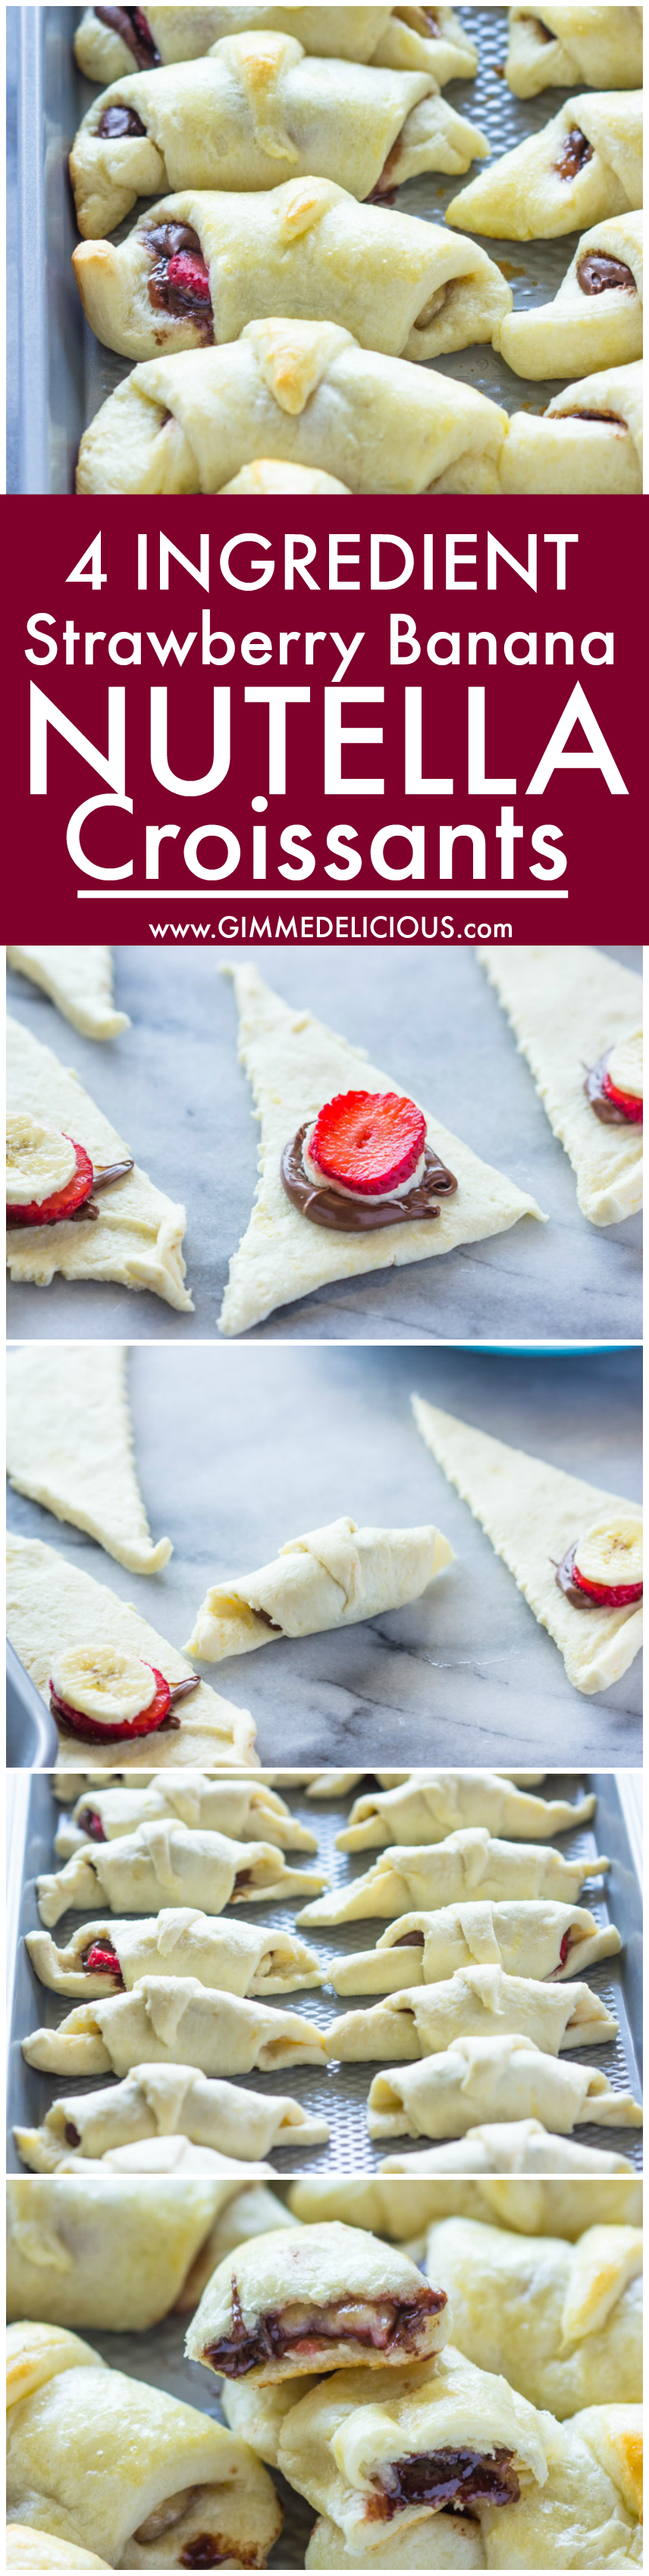 4 Ingredient Strawberry Banana Nutella Croissants | They are a great snack for breakfast, school, after school, the park, or just about anytime!